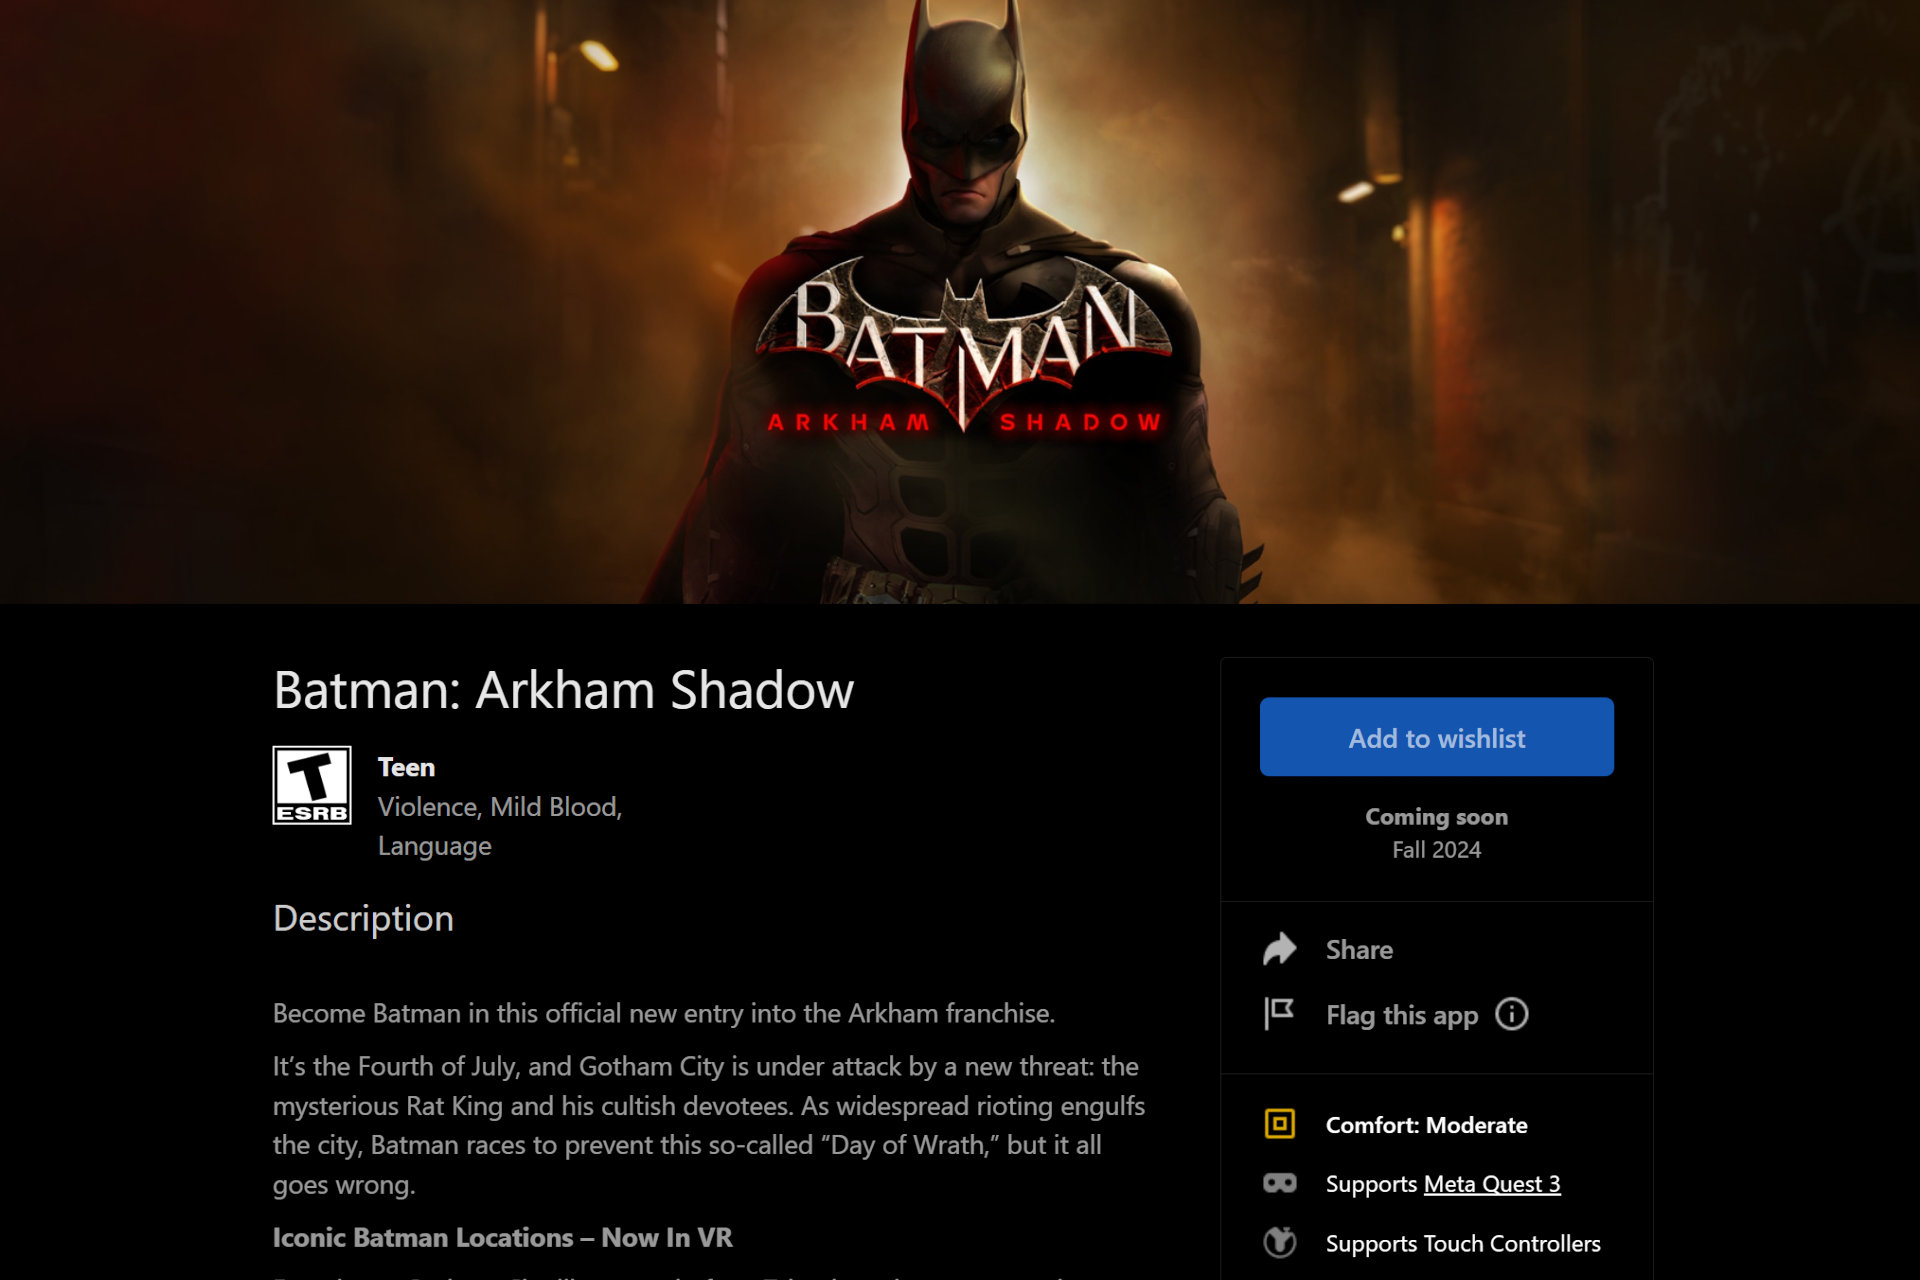 Batman Arkham Shadow will only support the Meta Quest 3.